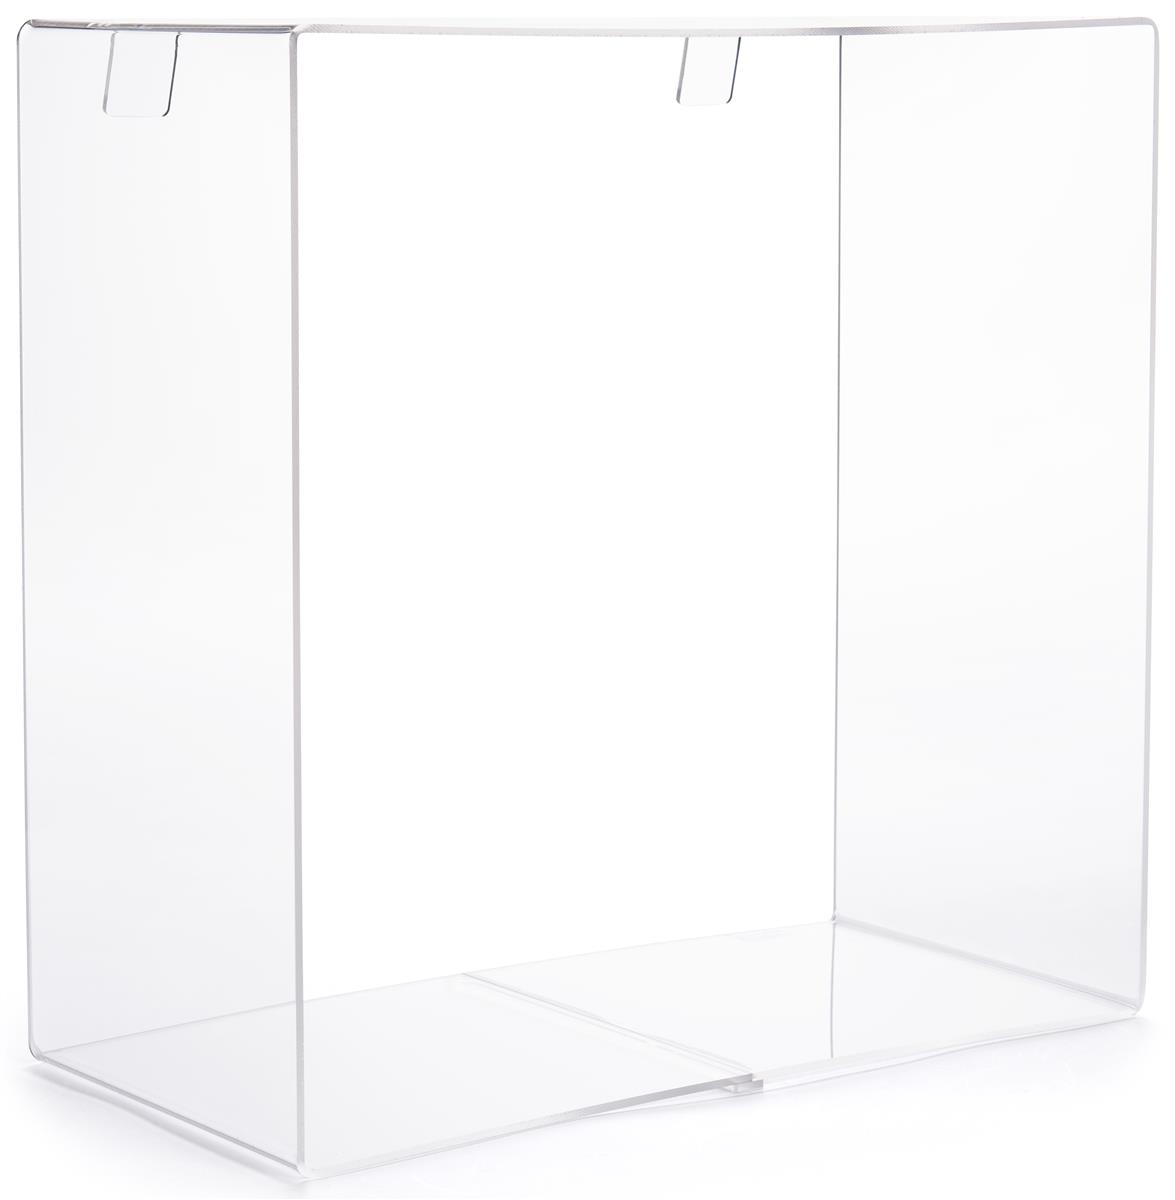 GLASS PANEL RETAIL DISPLAY CUBE FLOATING SHELF SAFETY PLATE PANE RECTANGLE 9x14 